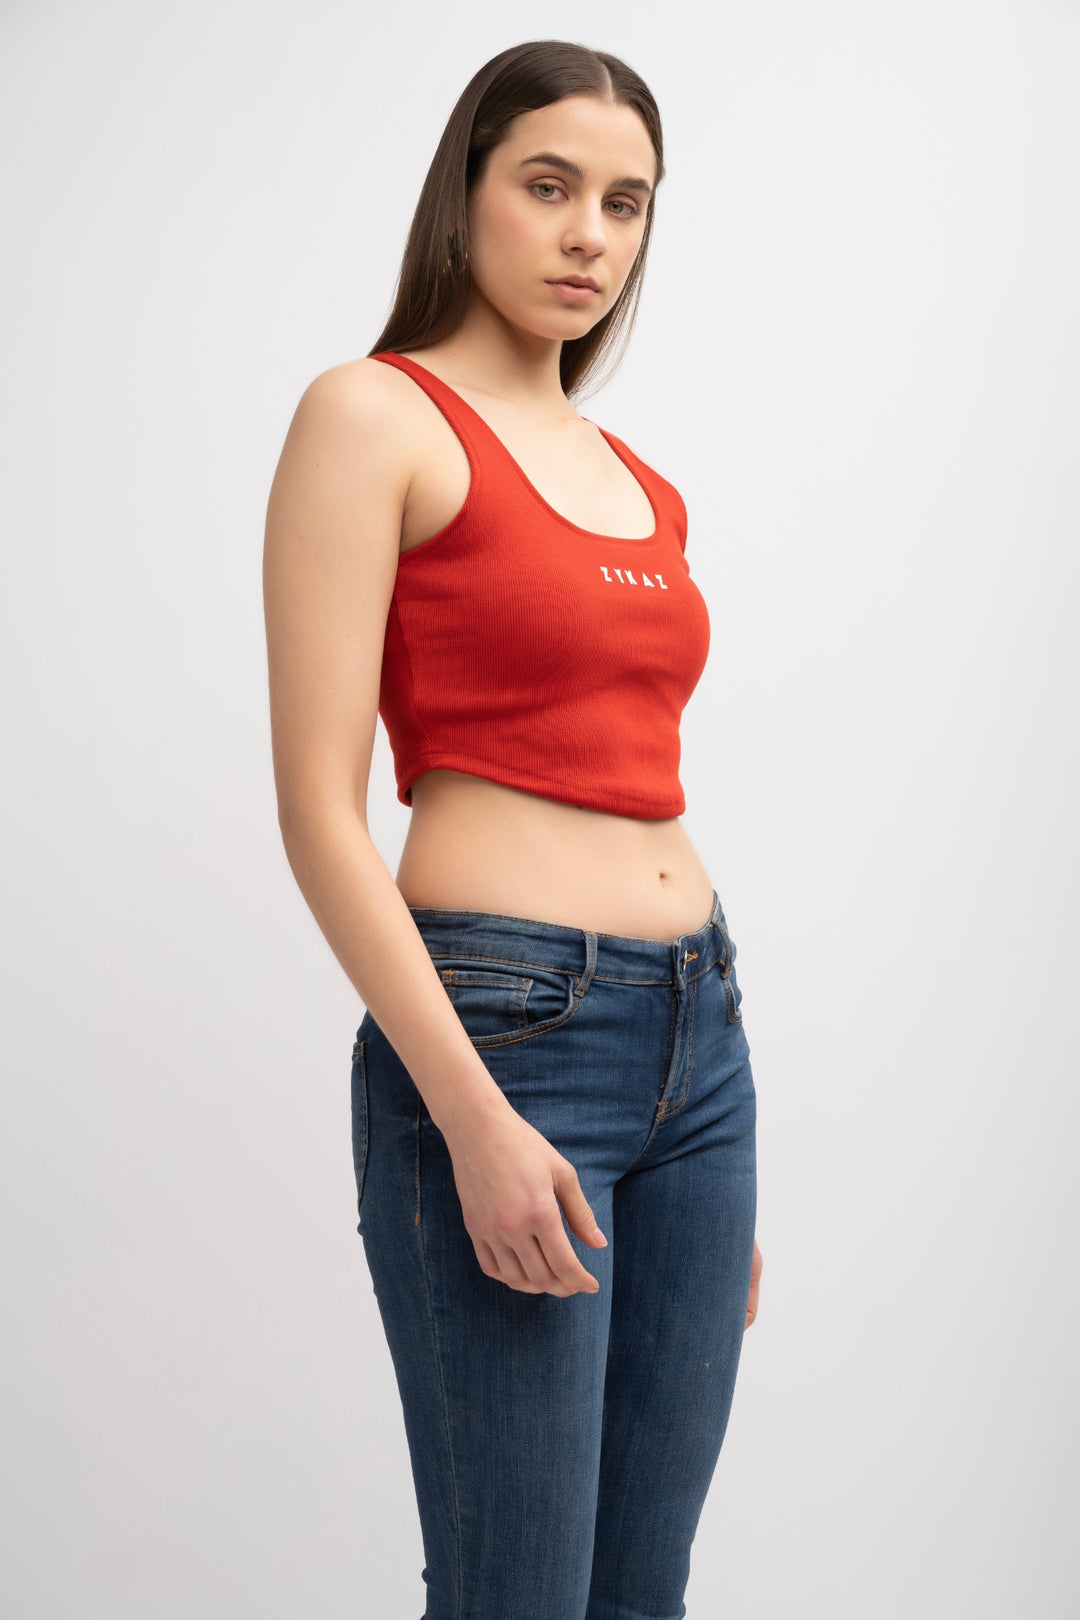 Zykaz Signature Solid Crop Top